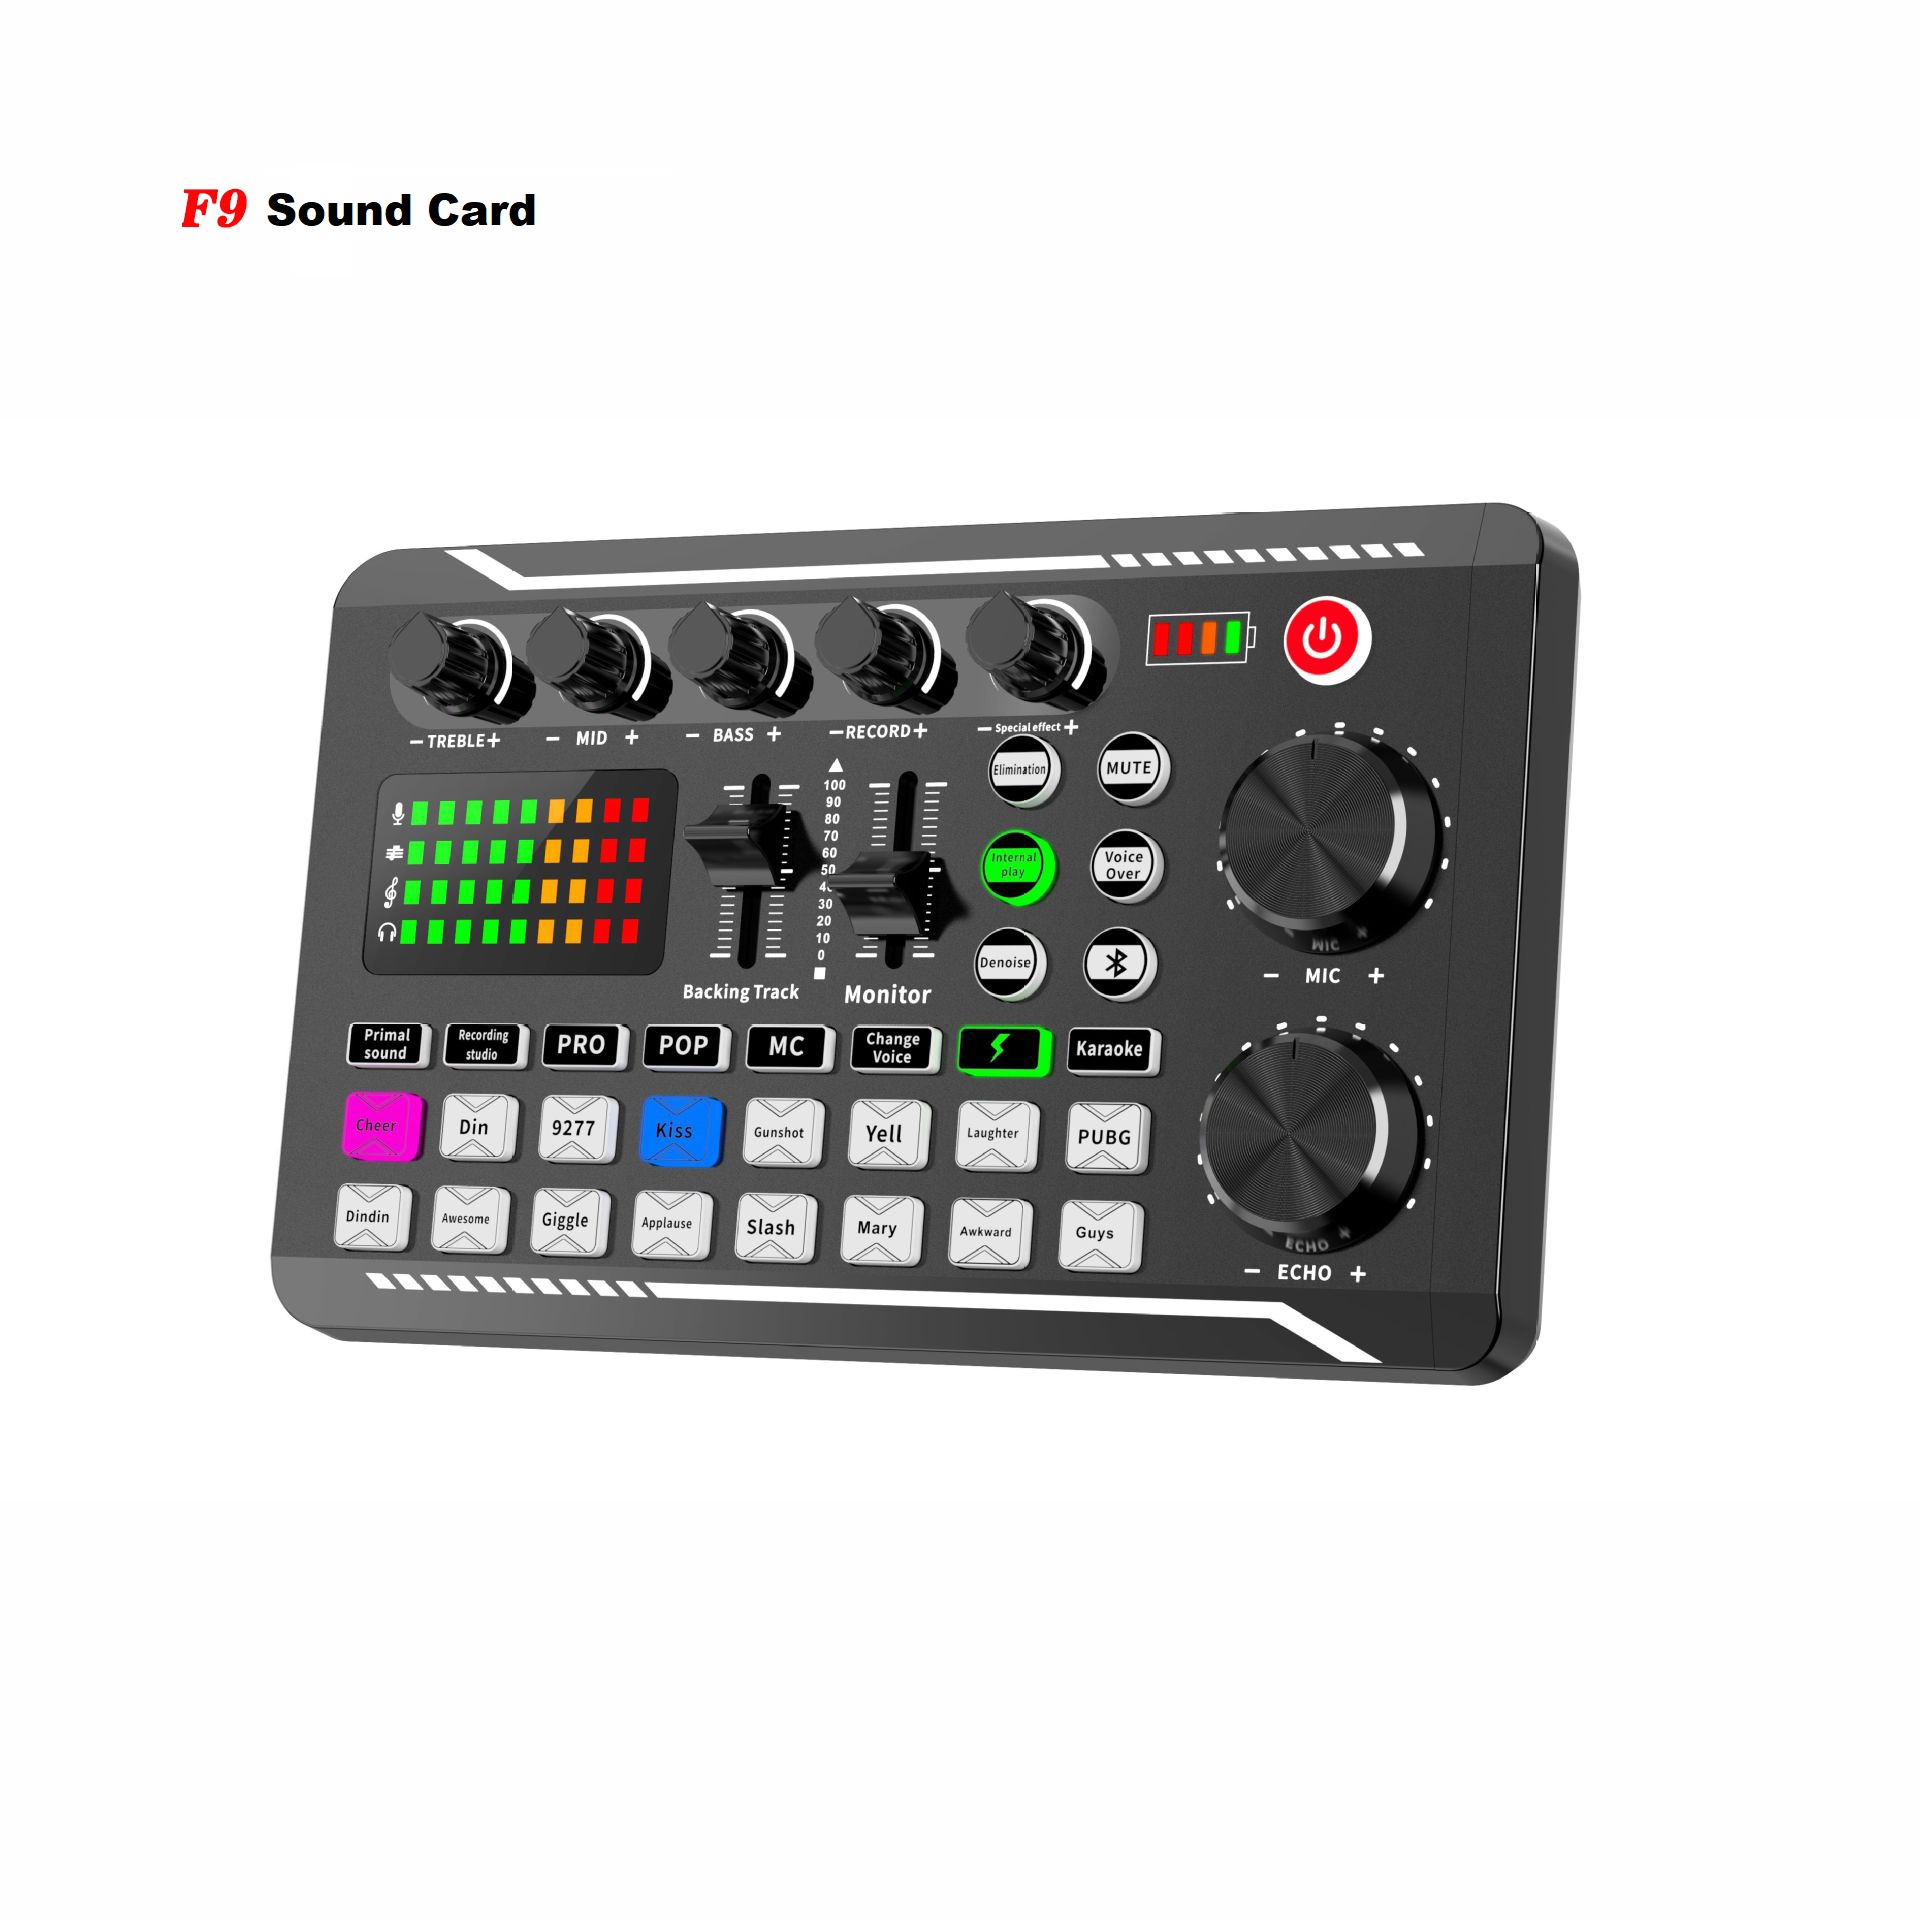 F9-Professional-Live-Sound-Card-Support-BT4.0-Audio-Noise-Canceling-Mixer